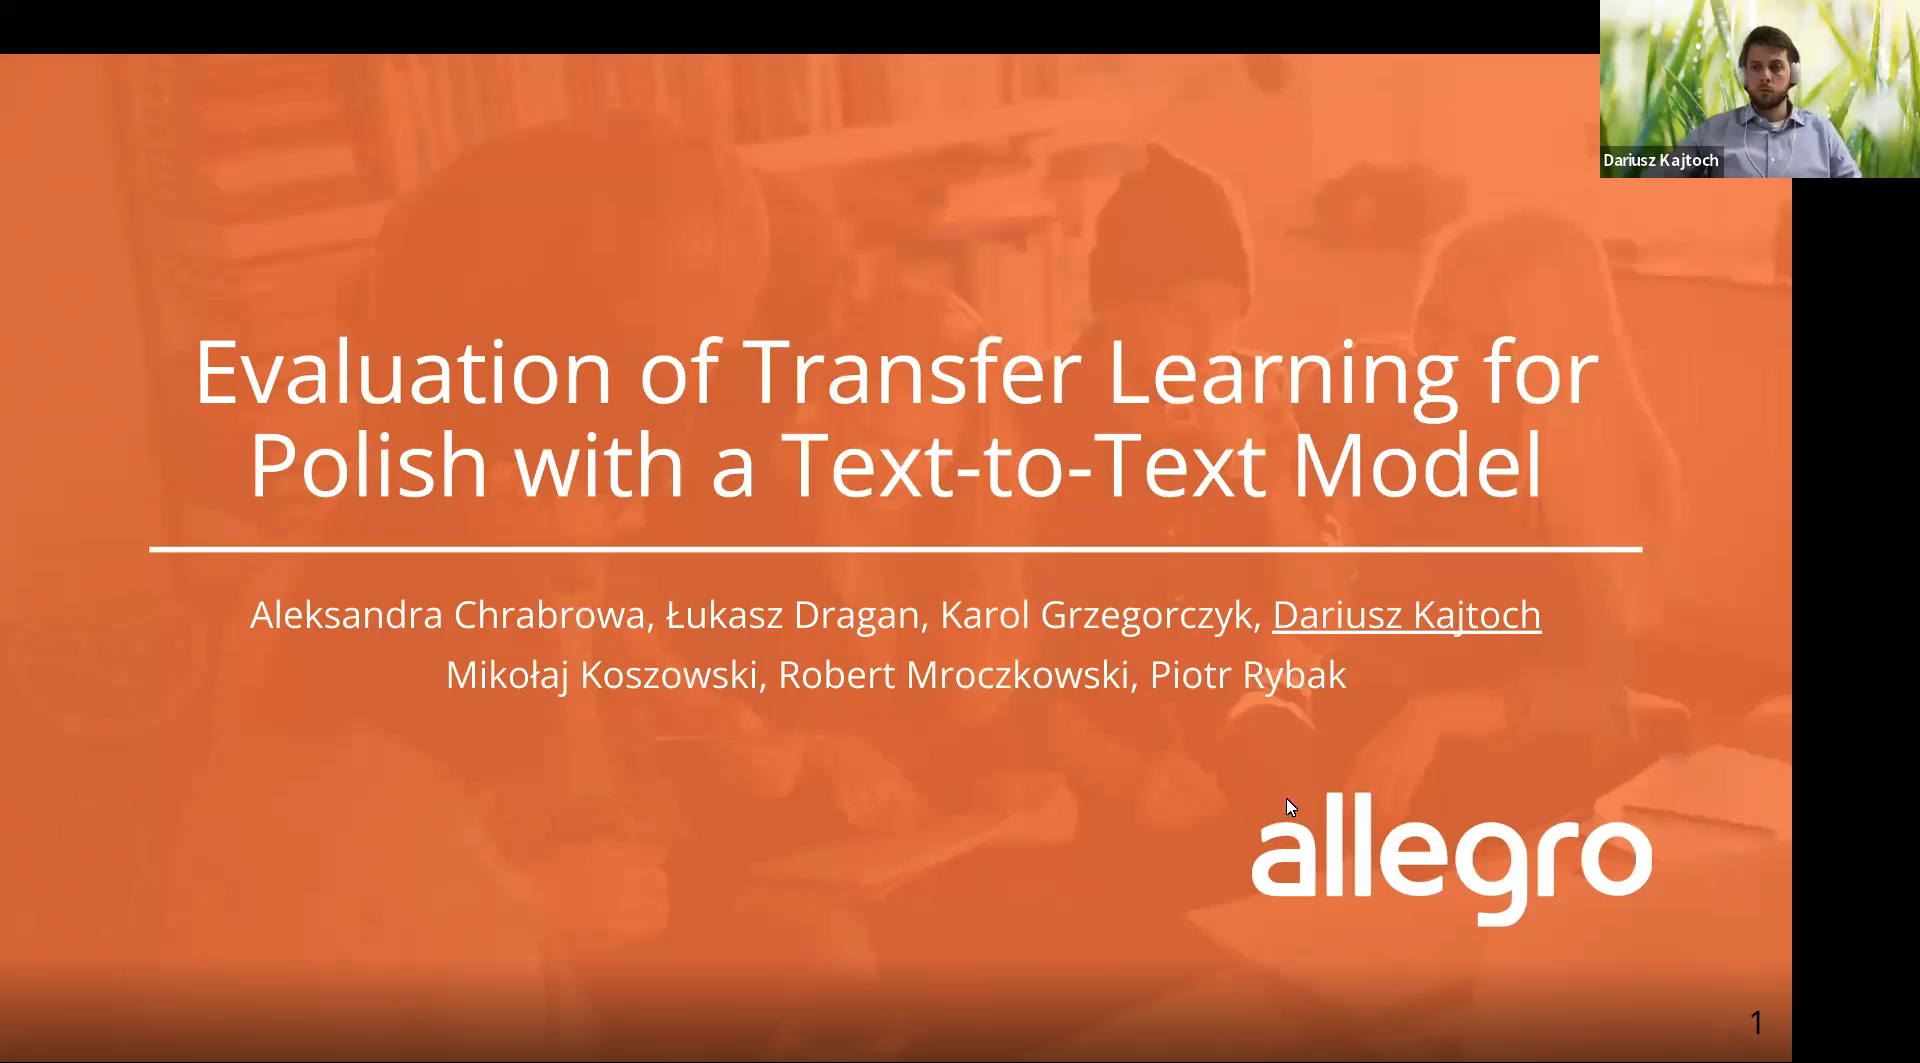 Evaluation of Transfer Learning for Polish with a Text-to-Text Model